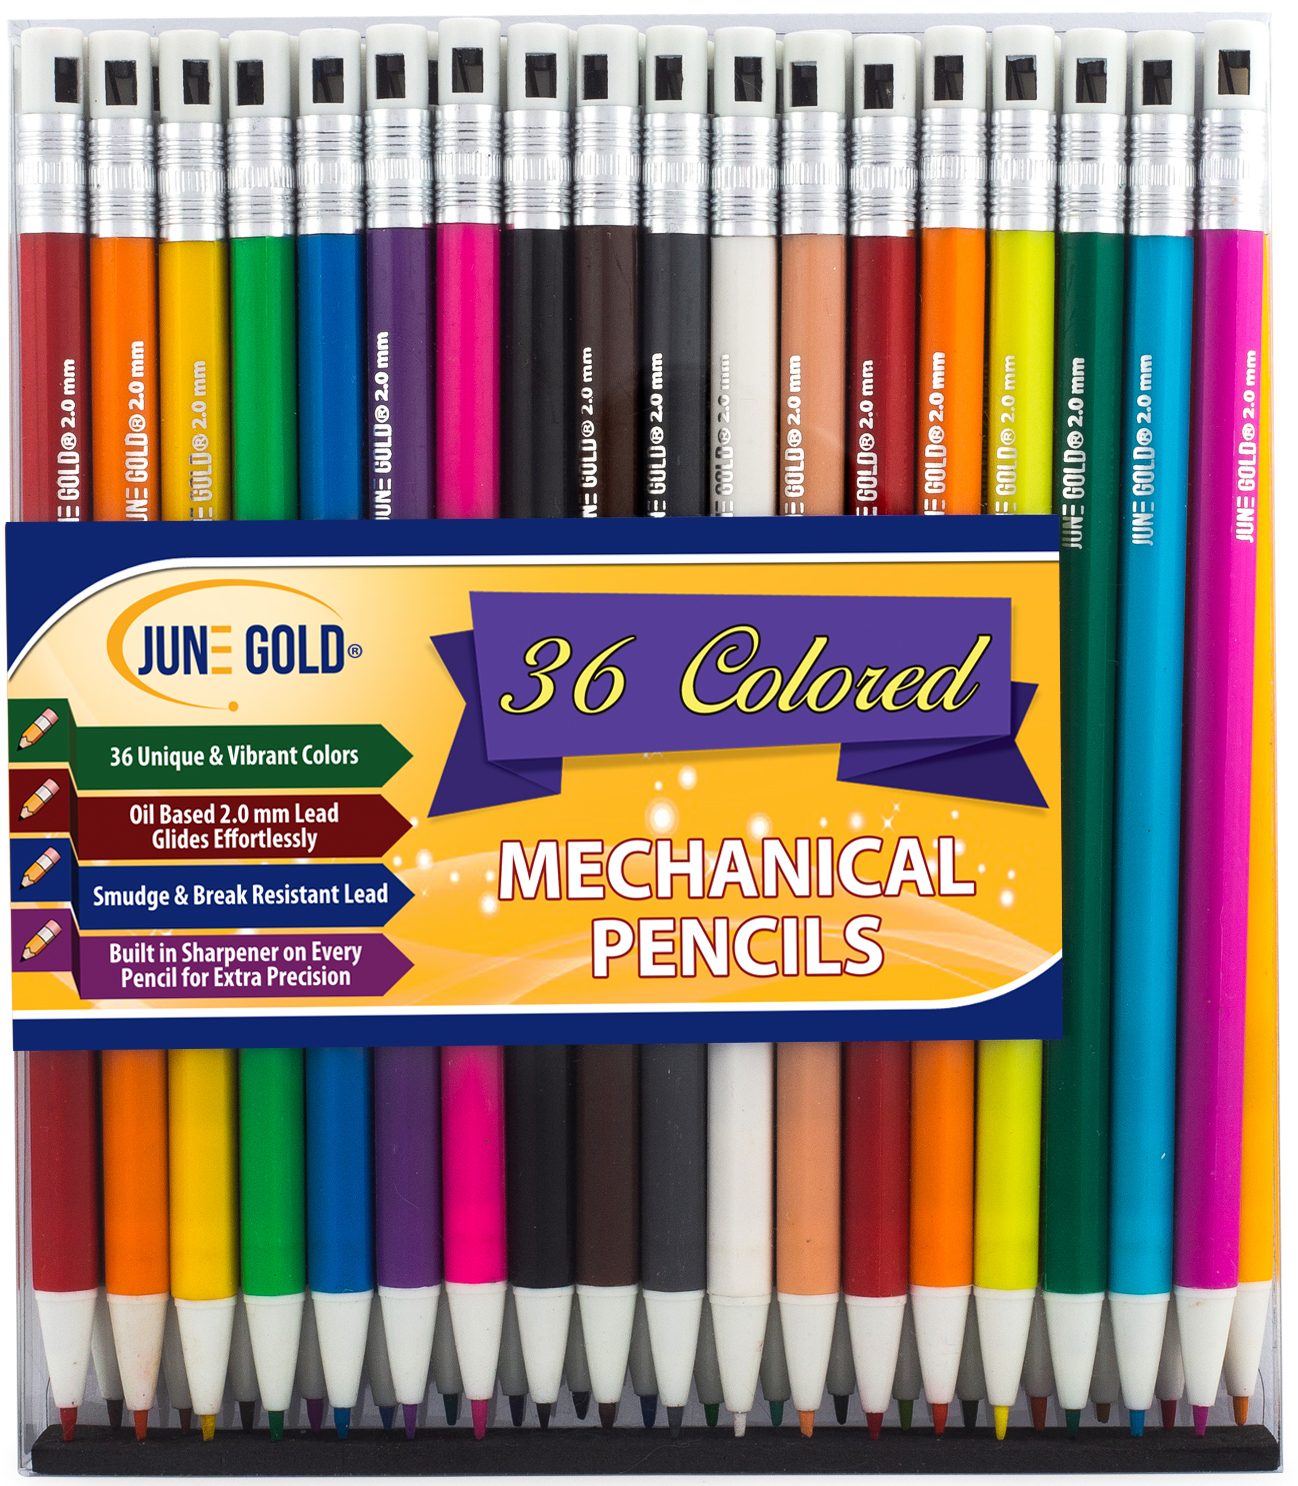 Hokusei Pencil 10805 Colored Pencils, 36 Colors, Girl Pattern, Can